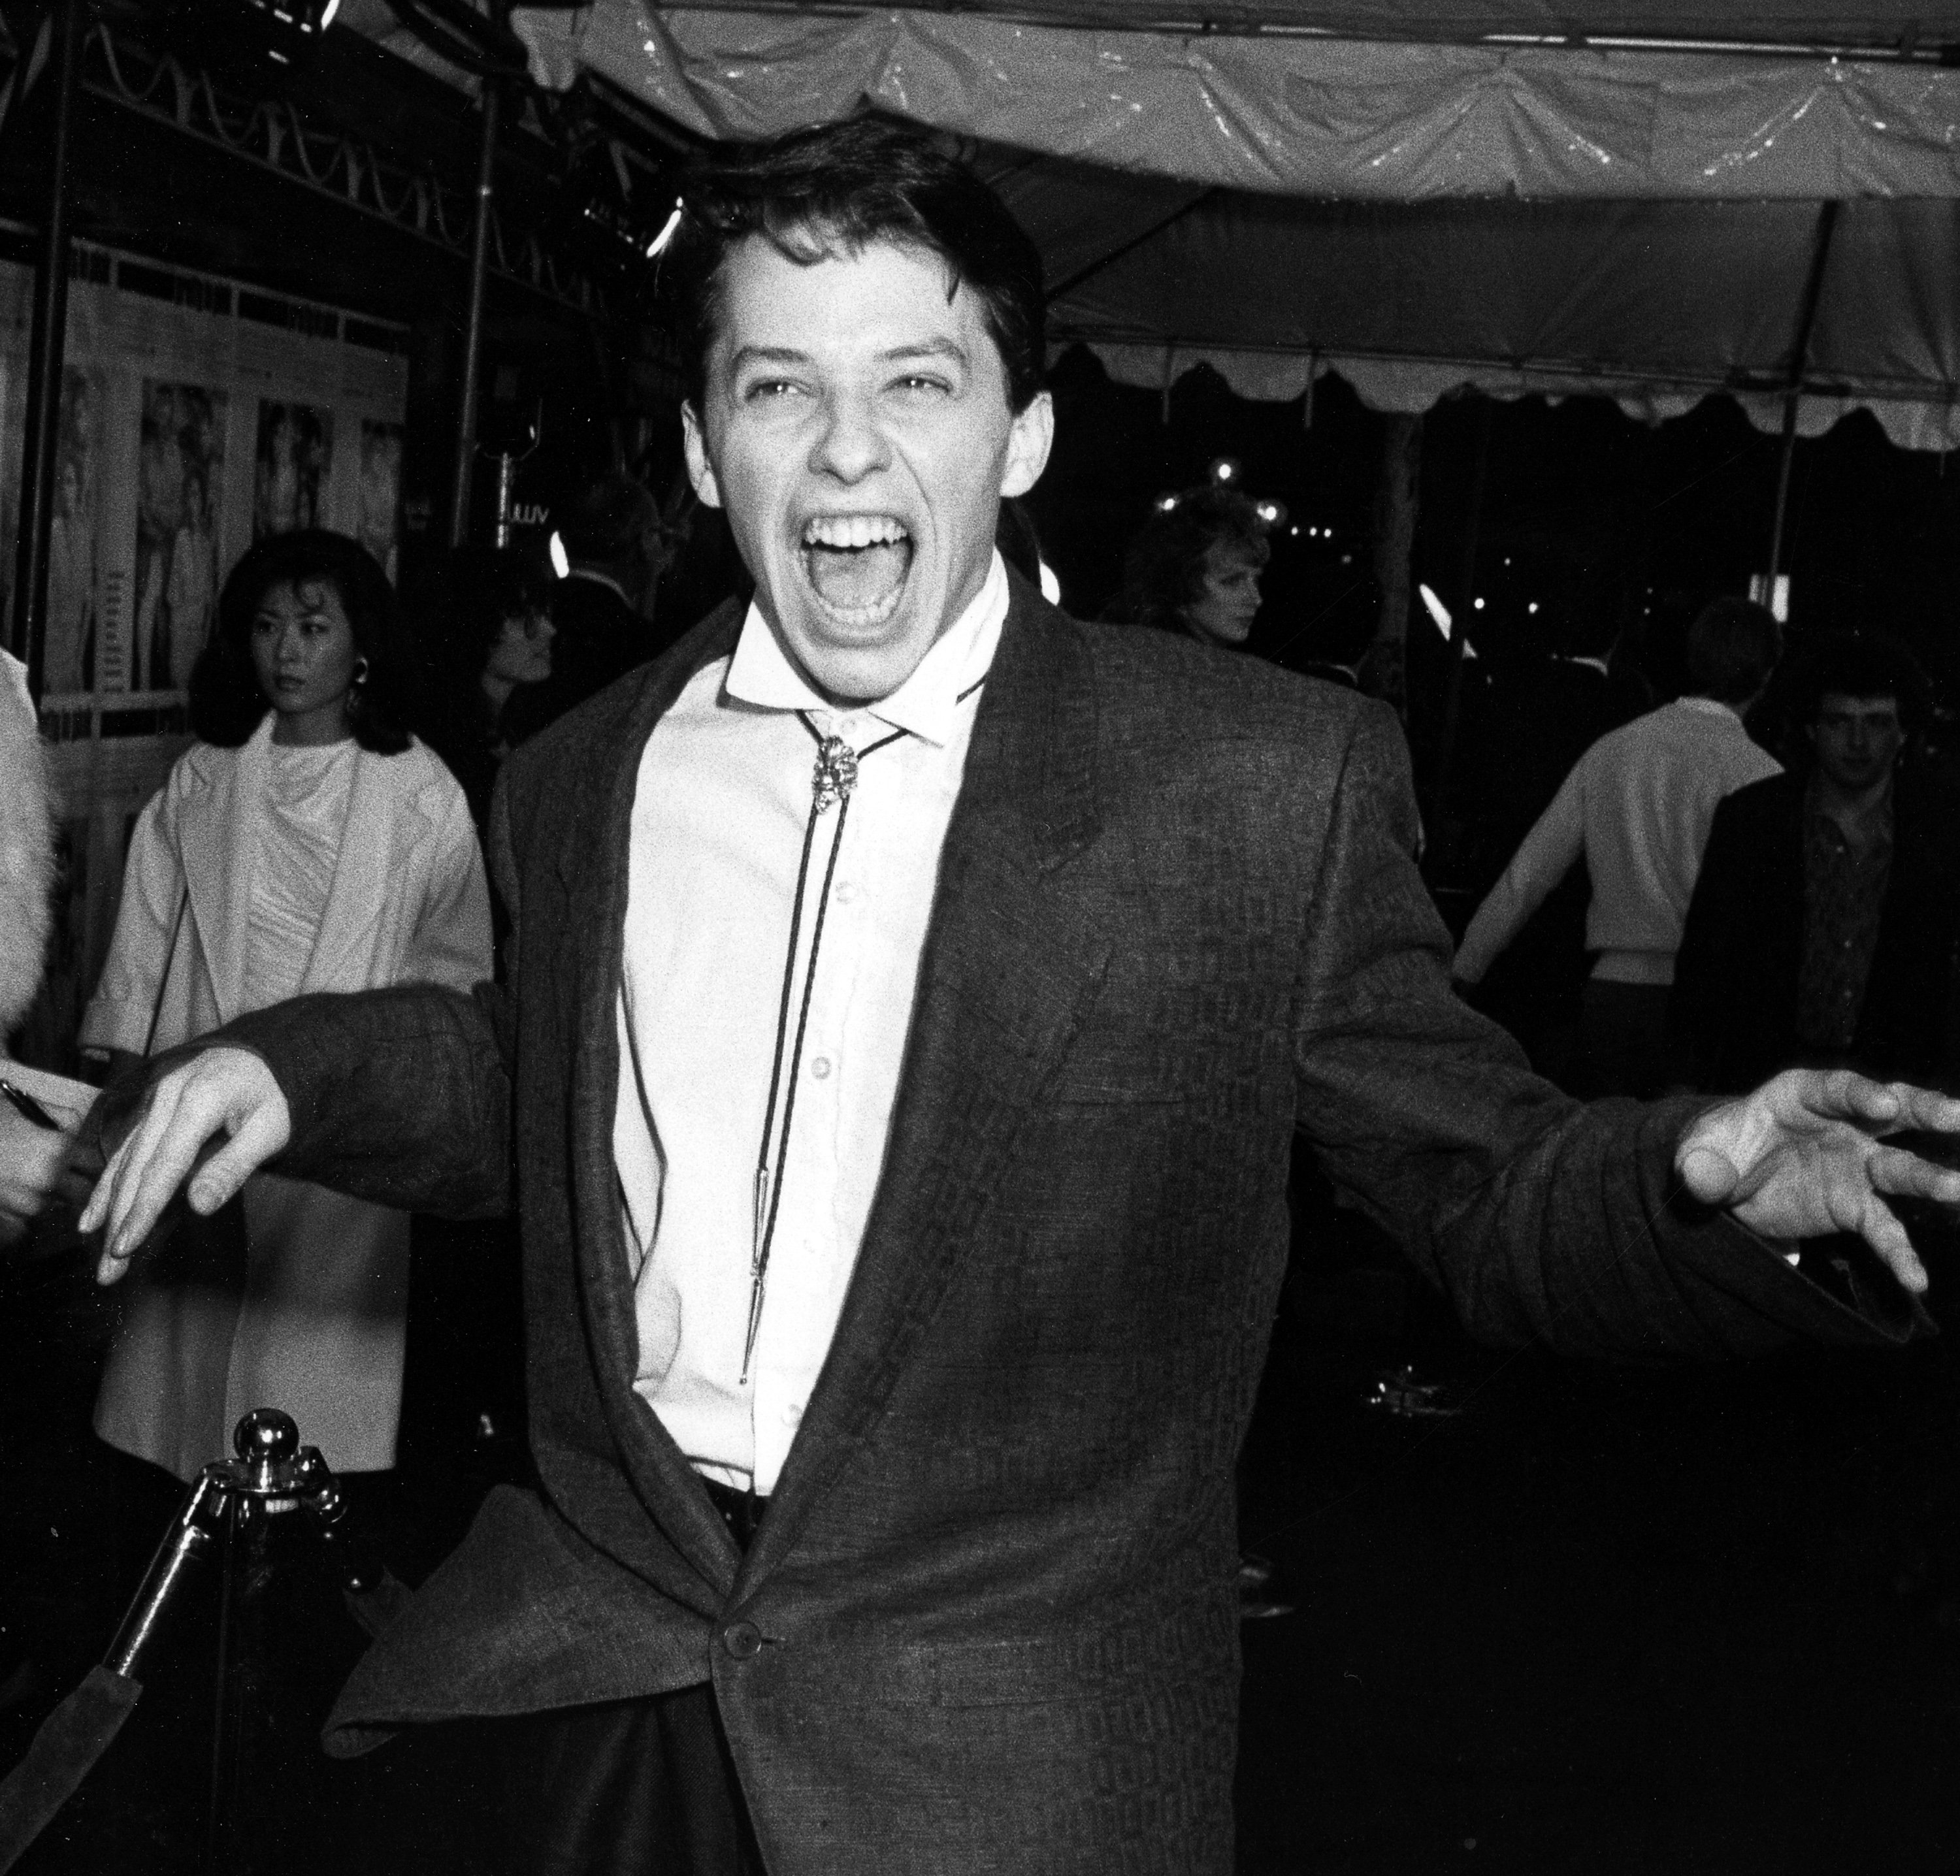 Jon Cryer during the "Pretty In Pink" Premiere